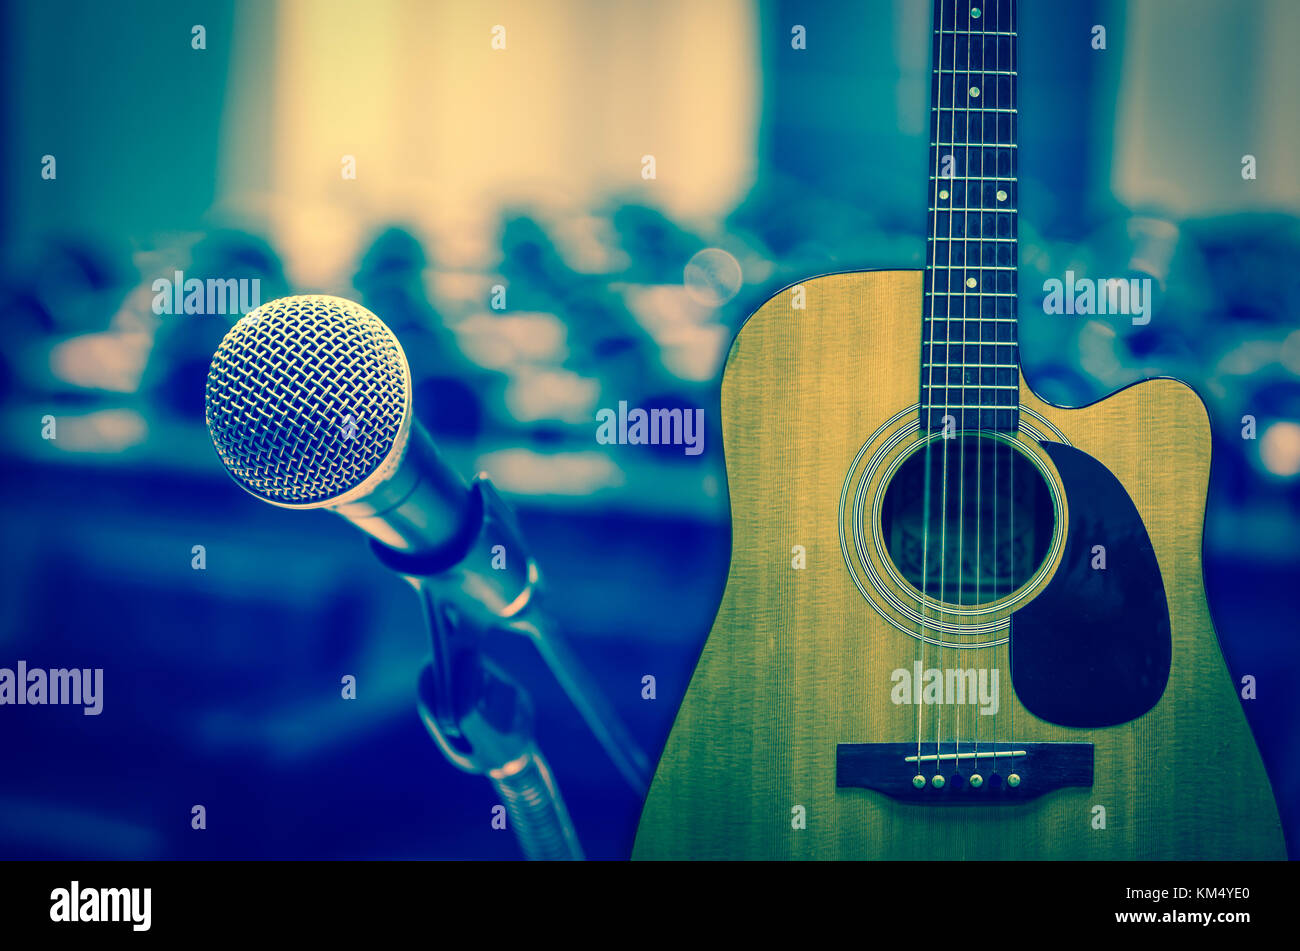 Guitar and Microphone over the Abstract blurred photo of concert or conference hall or seminar room background Stock Photo